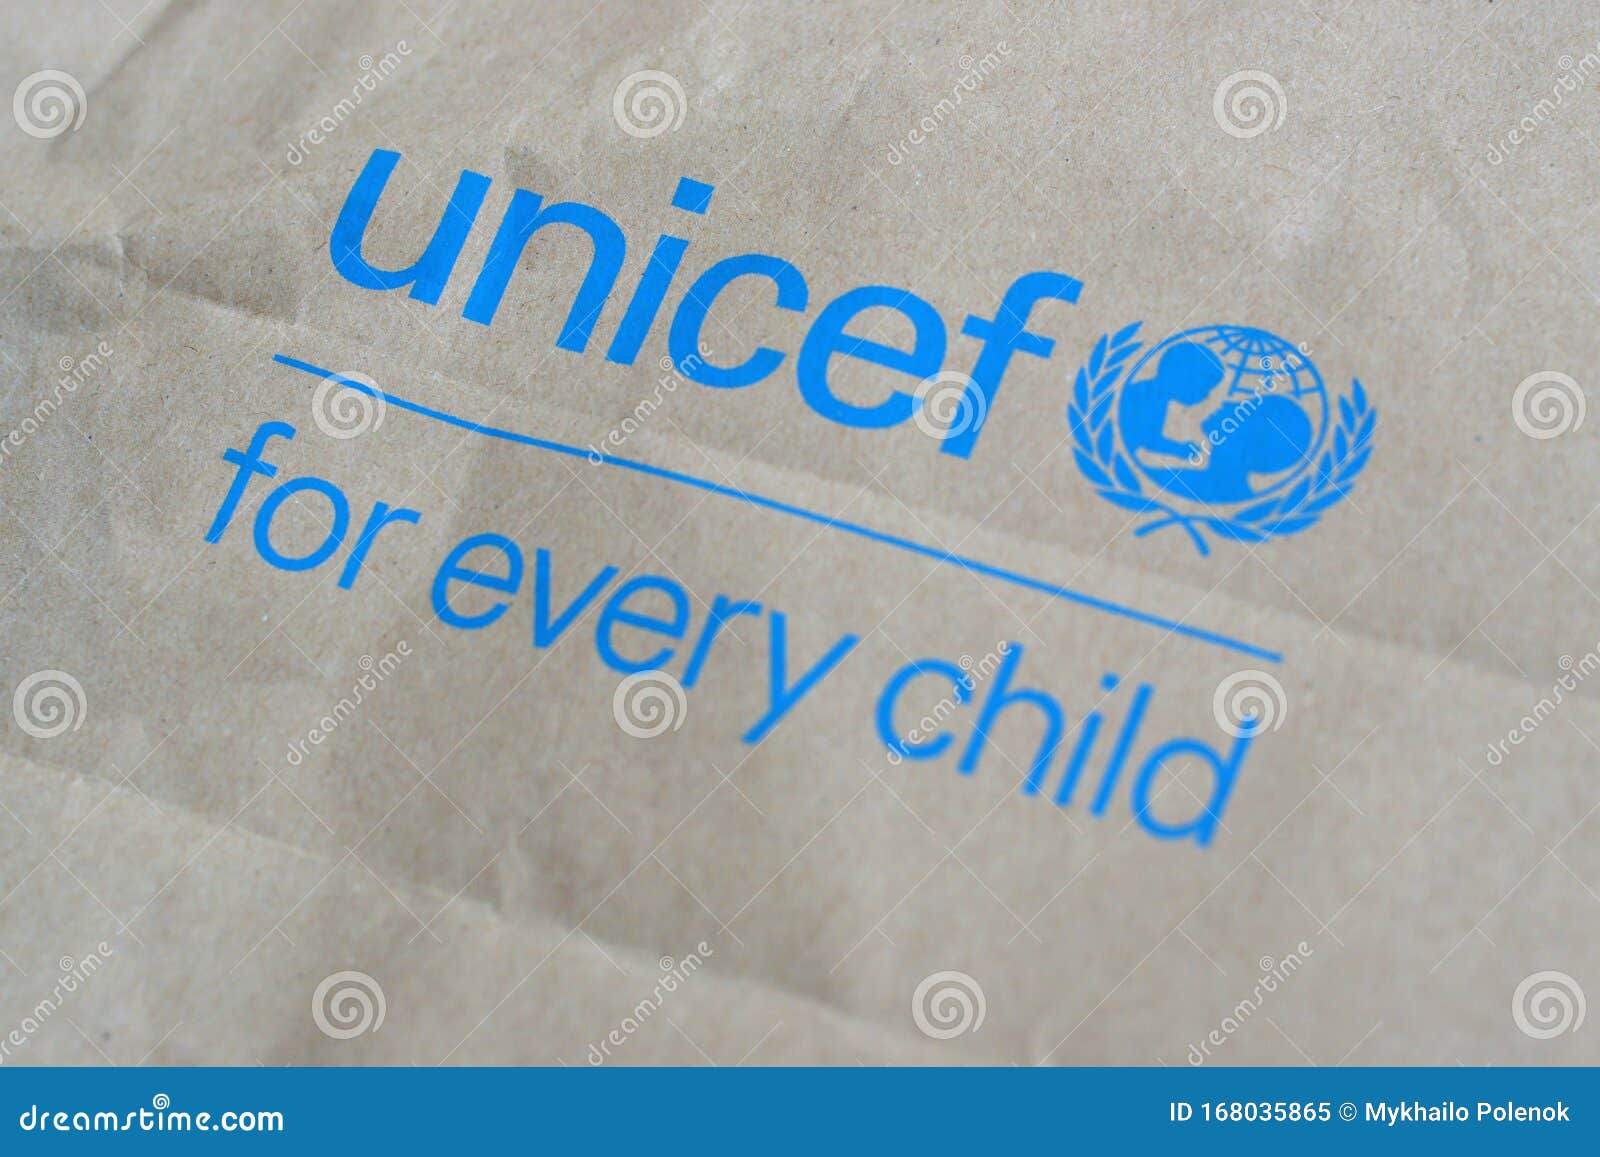 Unicef Blue Logo on Brown Paper Bag, United Nations Childrens Fund is ...